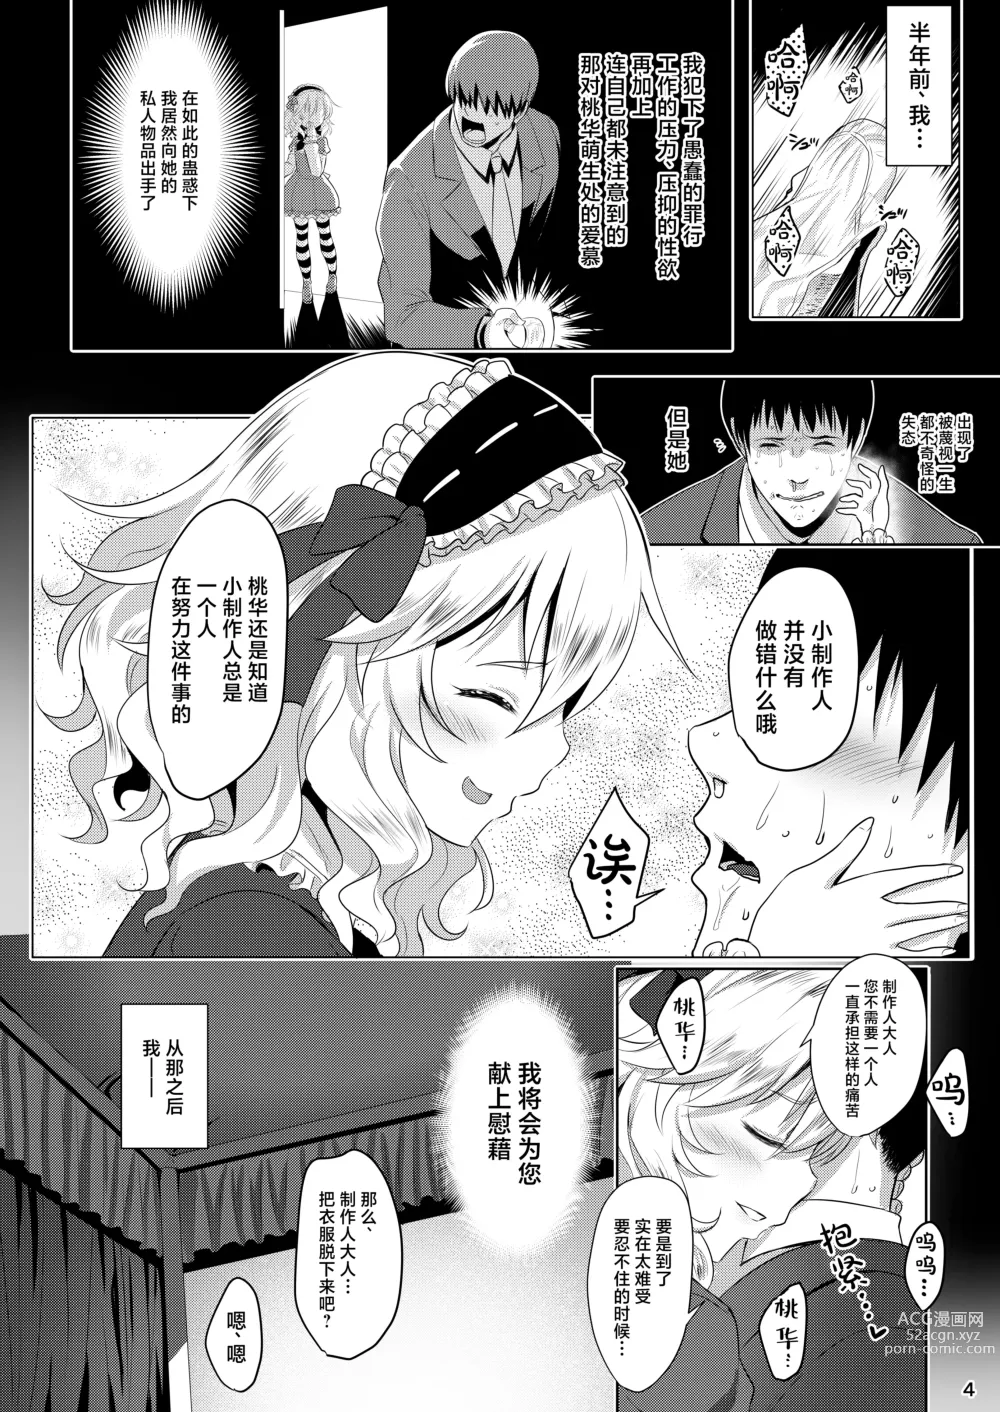 Page 3 of doujinshi CHAMMERs